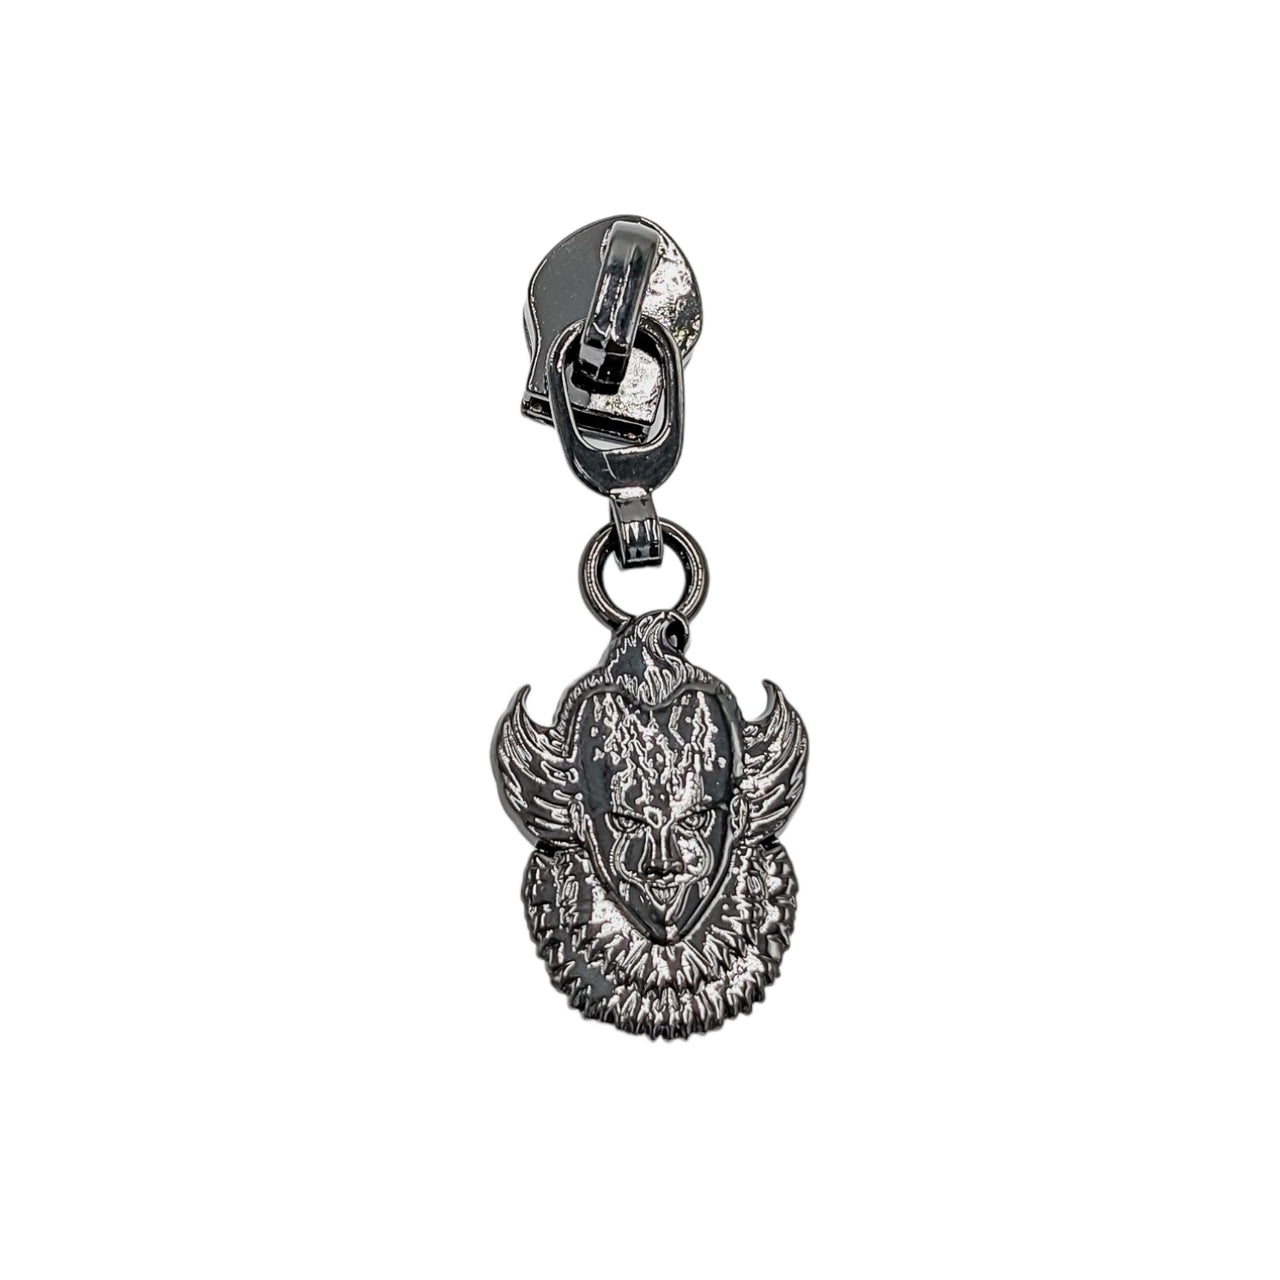 Pennywise Zipper Pull - Pack of 5